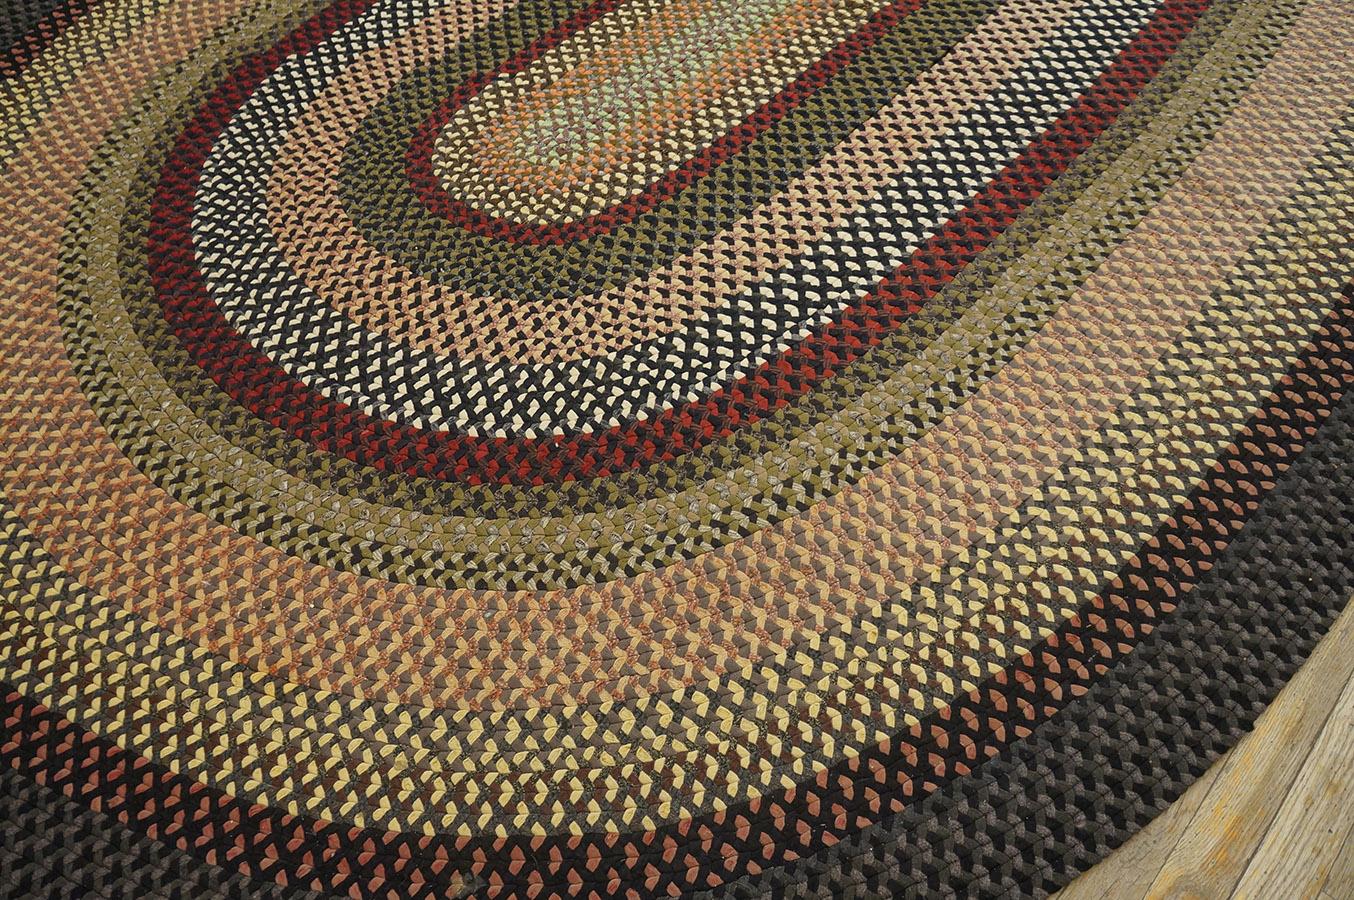 Woven 1930s American Braided Rug ( 7'6